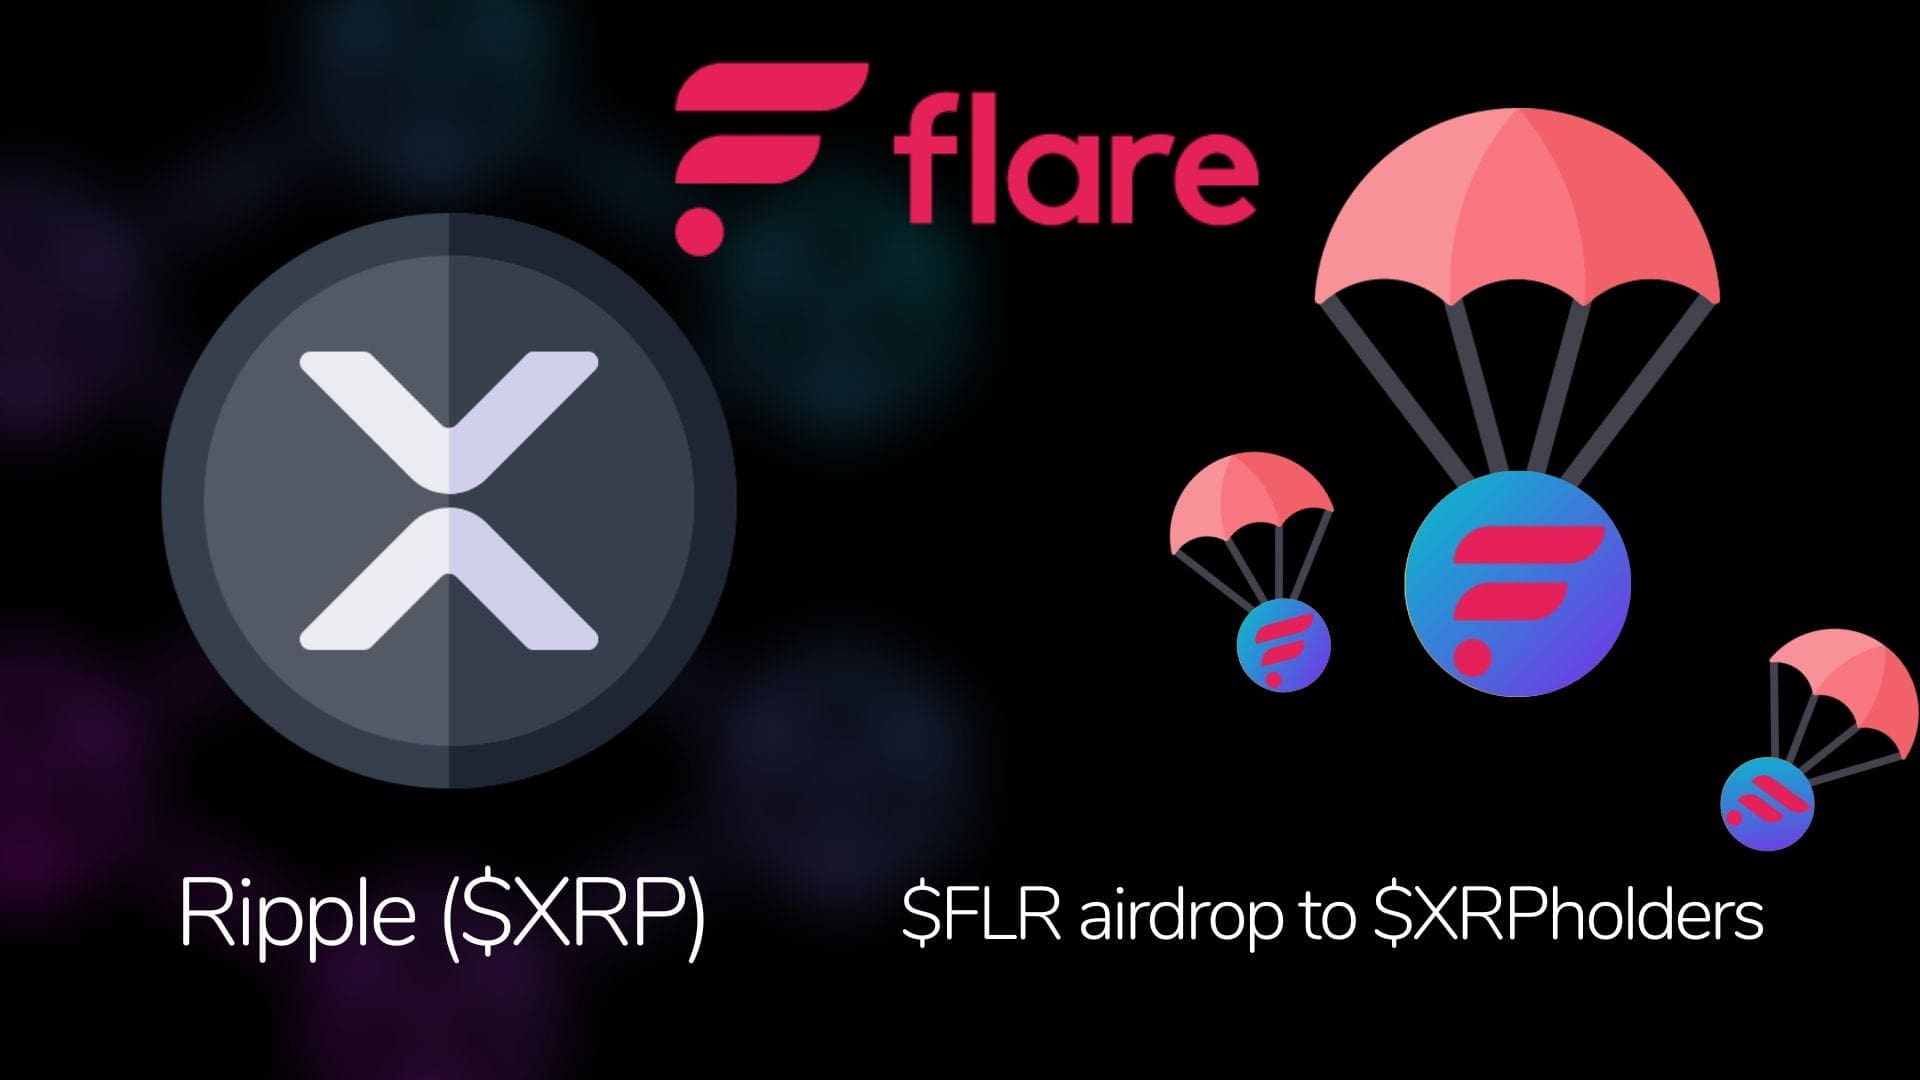 Ripple (XRP) distribuisce l'airdrop Flare